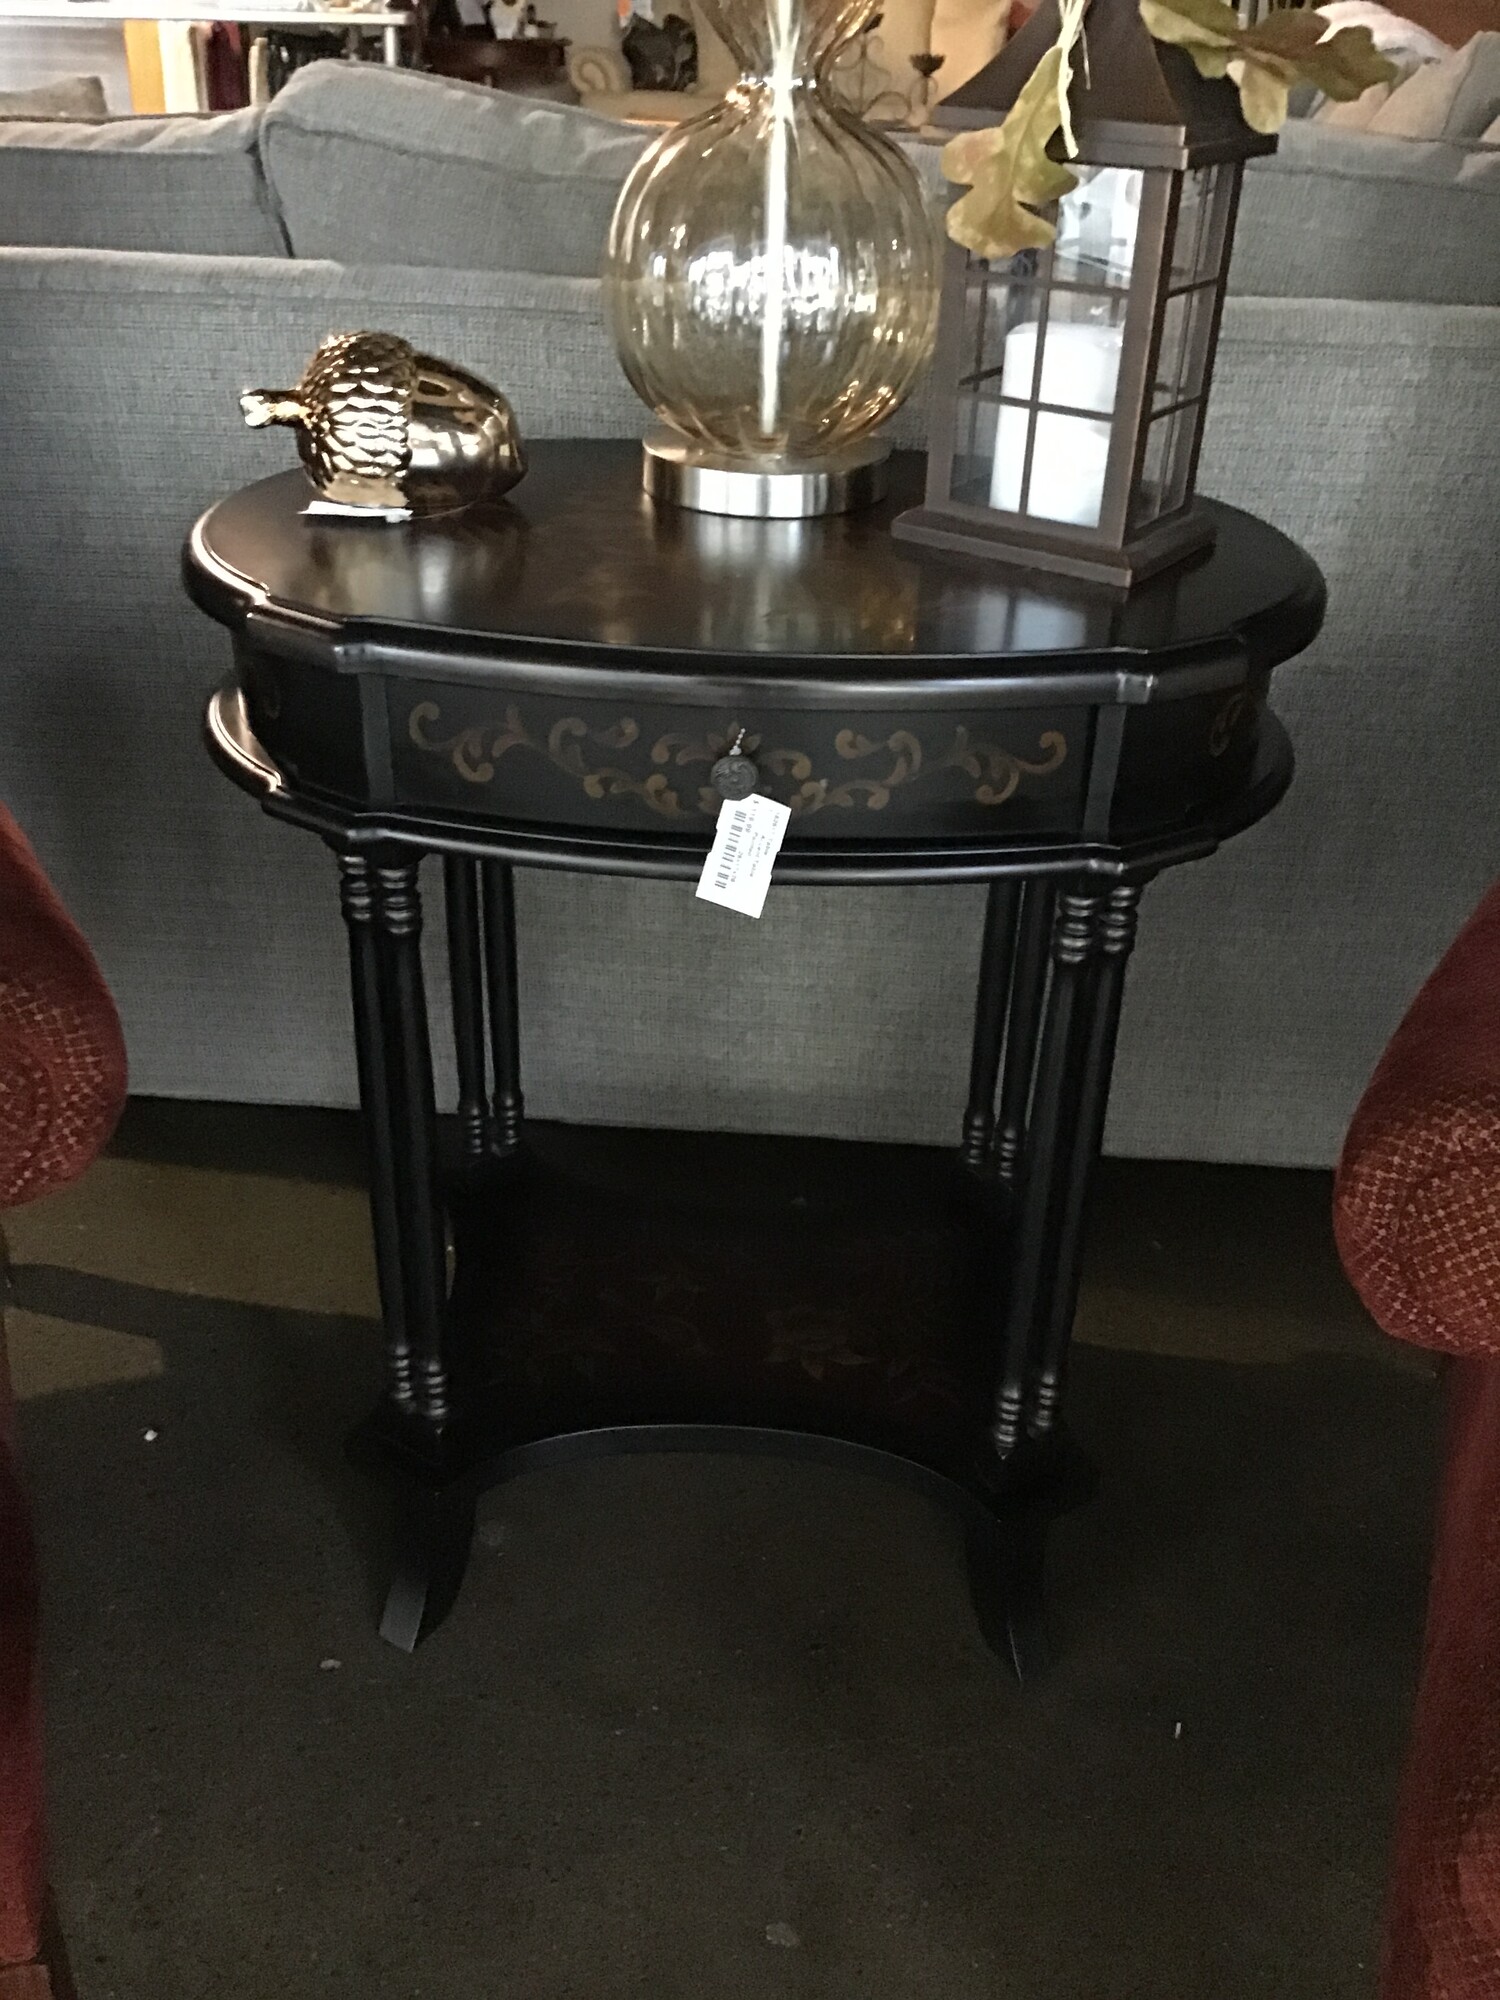 Accent Table
1 Drawer
Lower Shelf
Double rail sides
Black with light gld painted leaves, flowers and birds

Dimension: 25x17x29